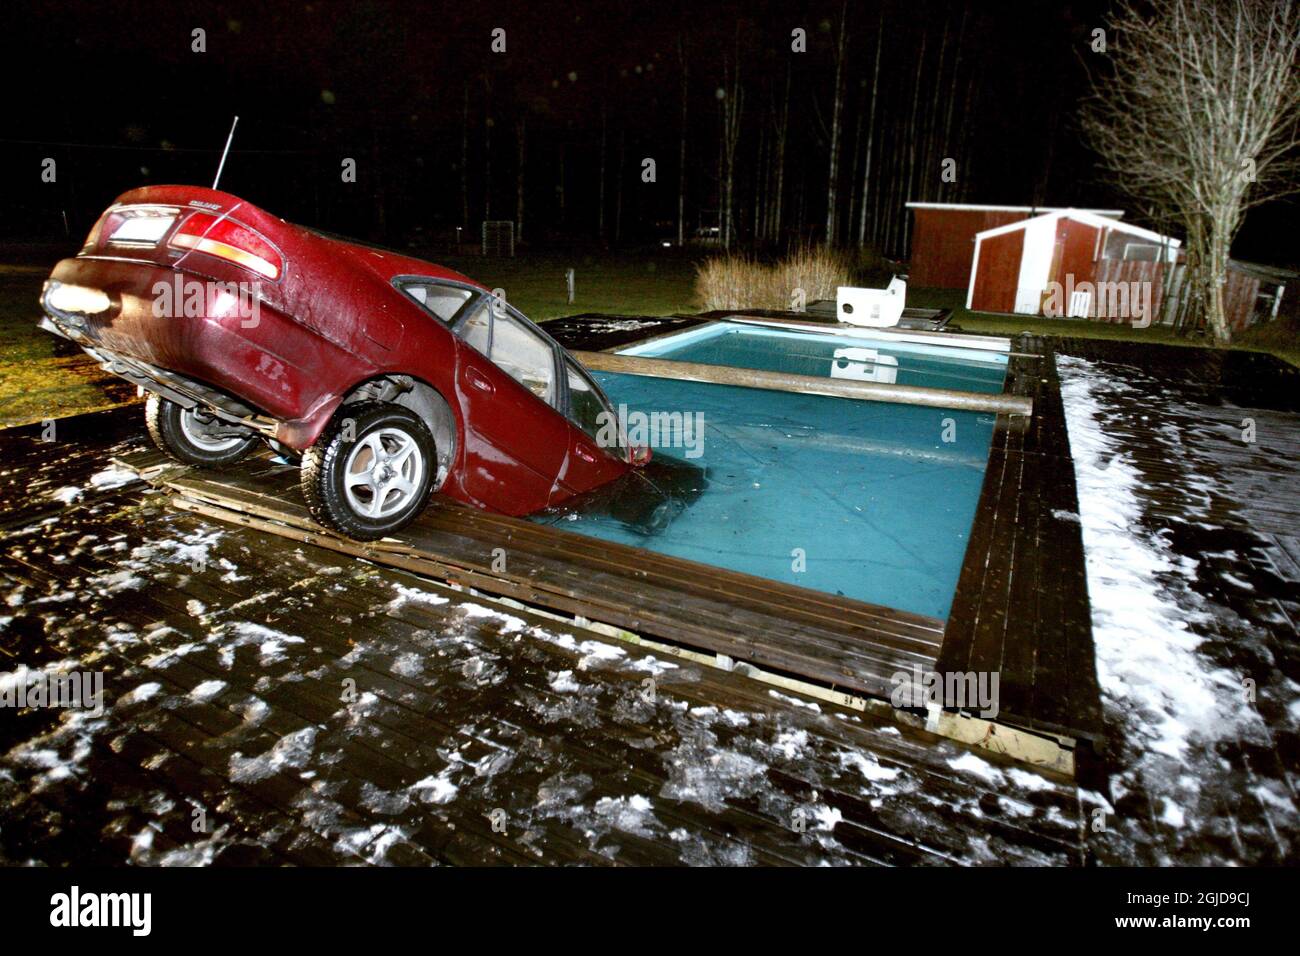 Married couple Bo Lundgren and Mona Backman had a surprise waiting when they arrived to their home  in the village of Ojebyn, north Sweden late the  evening of November 6, 2007 . The driver of a car had became  unconscious and his his car ended up in the pool.       Stock Photo